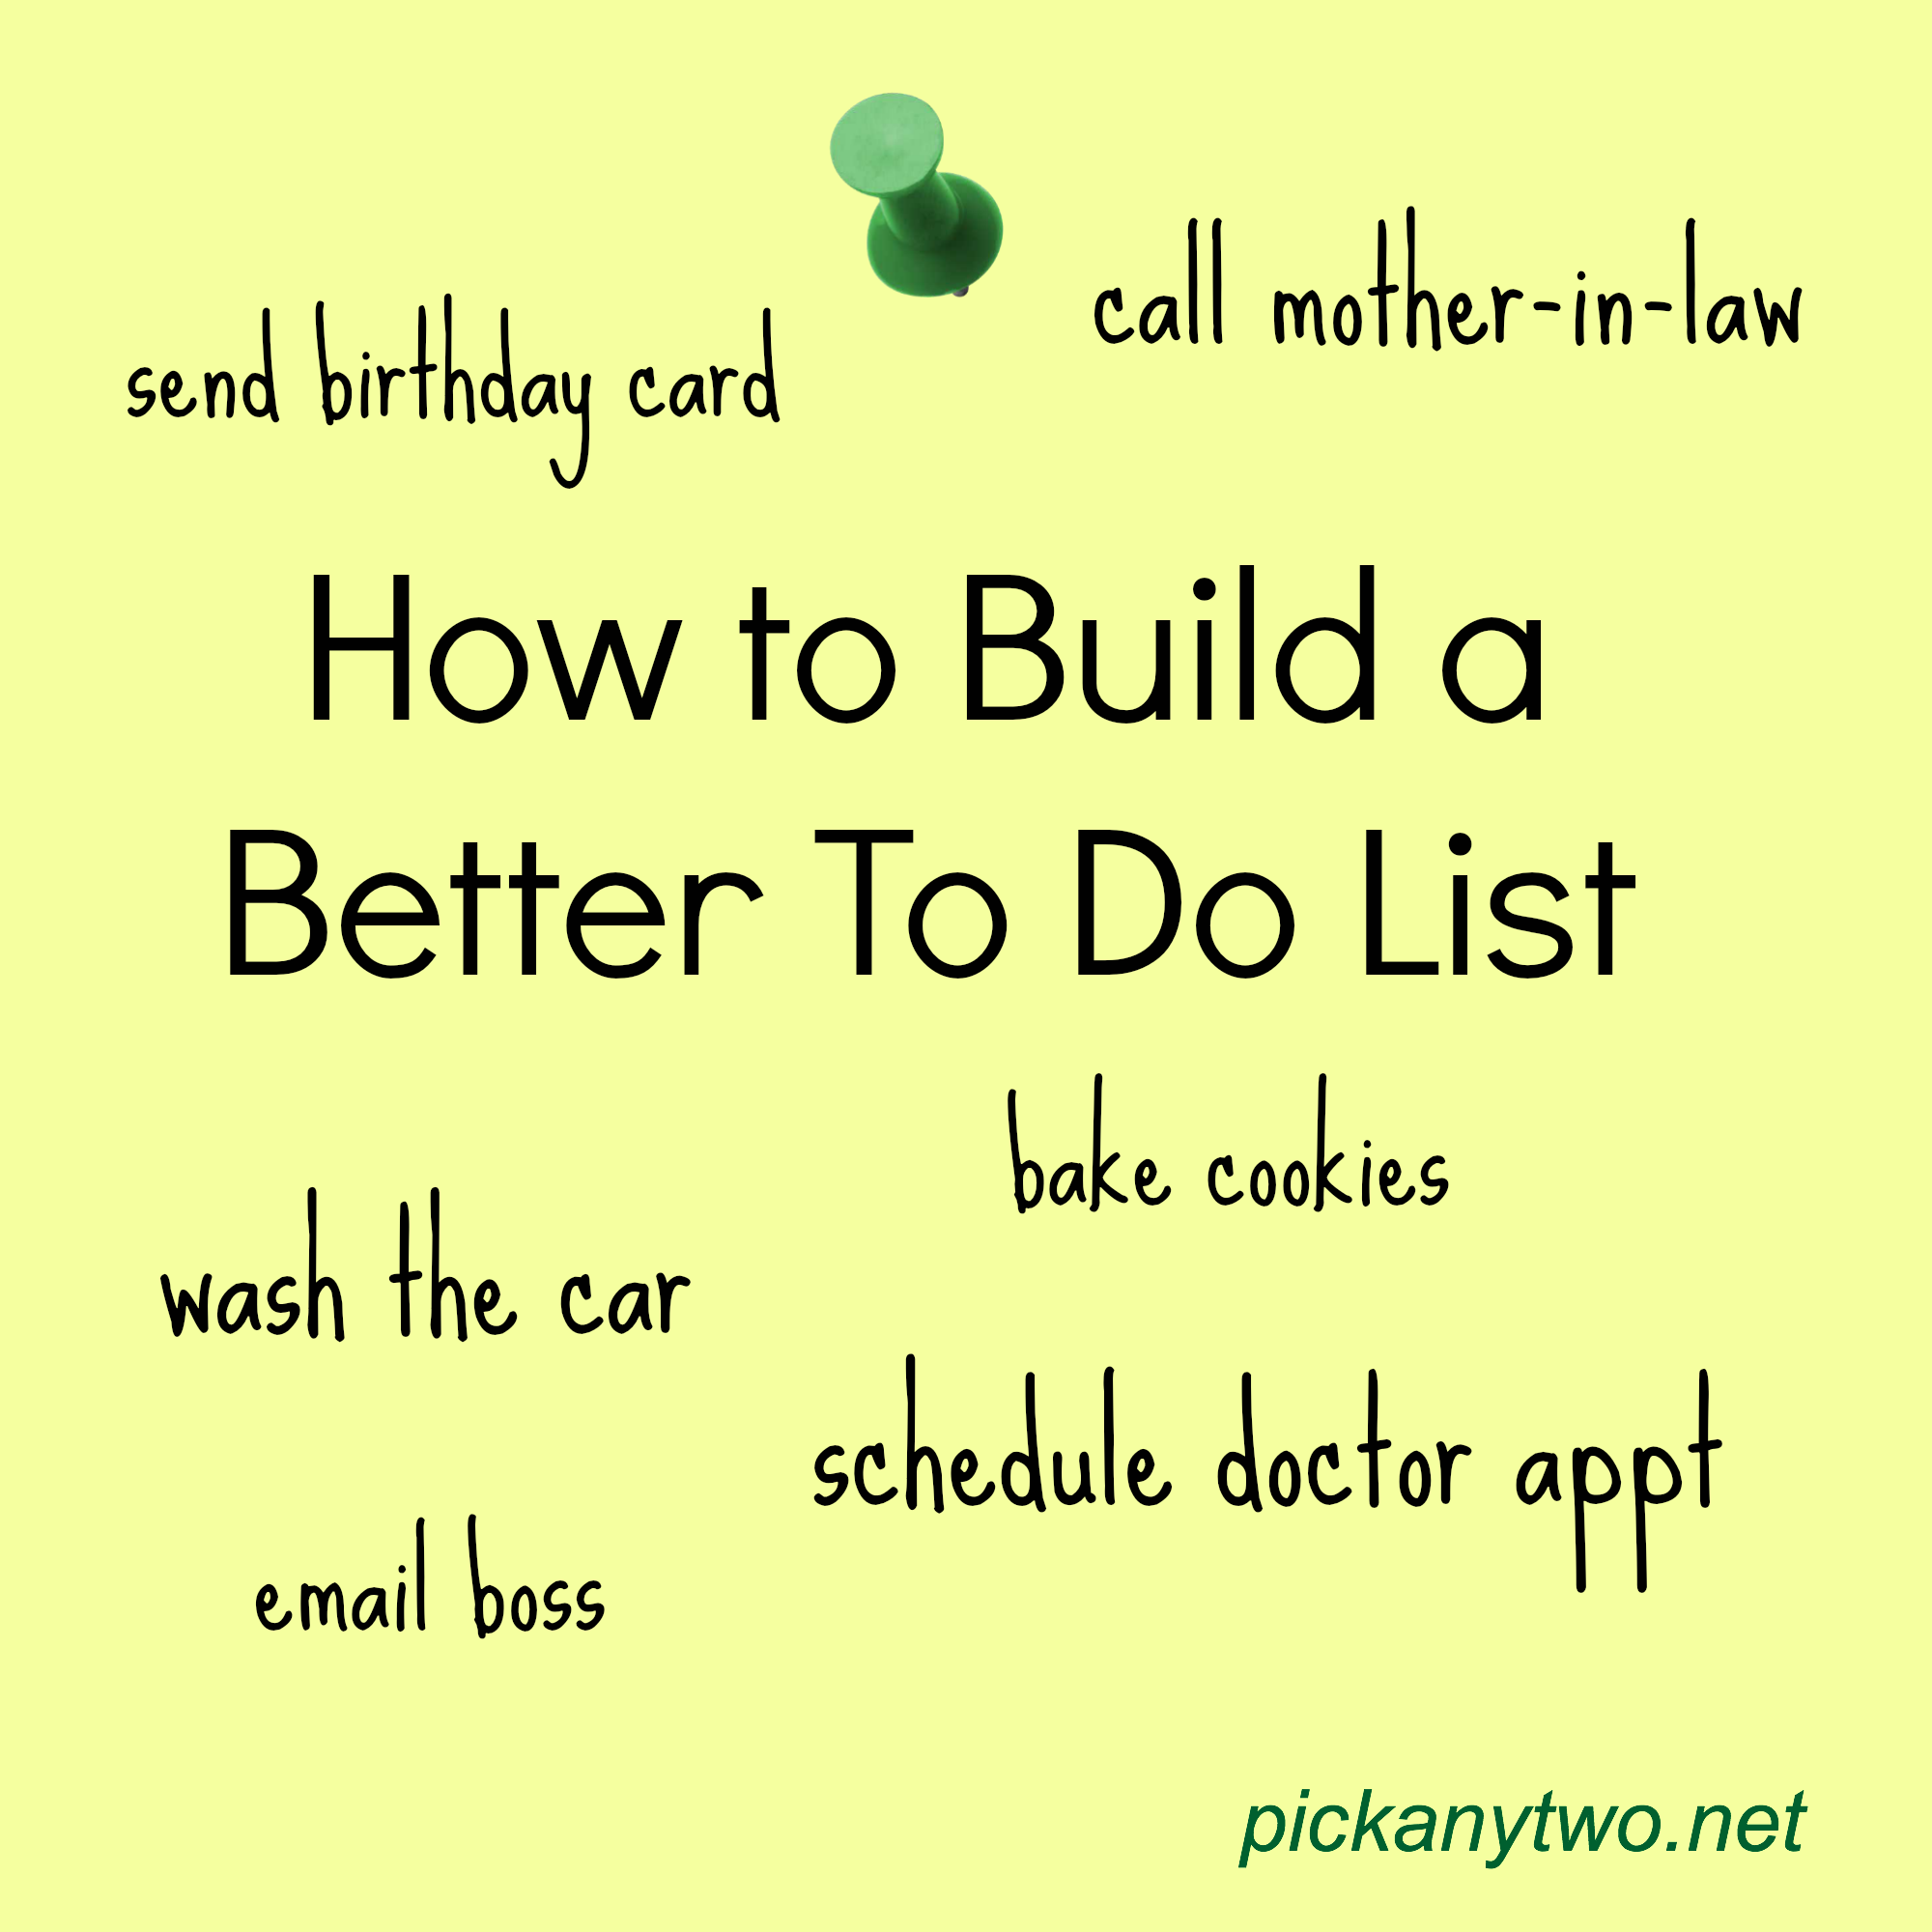 How to Build a Better To Do List